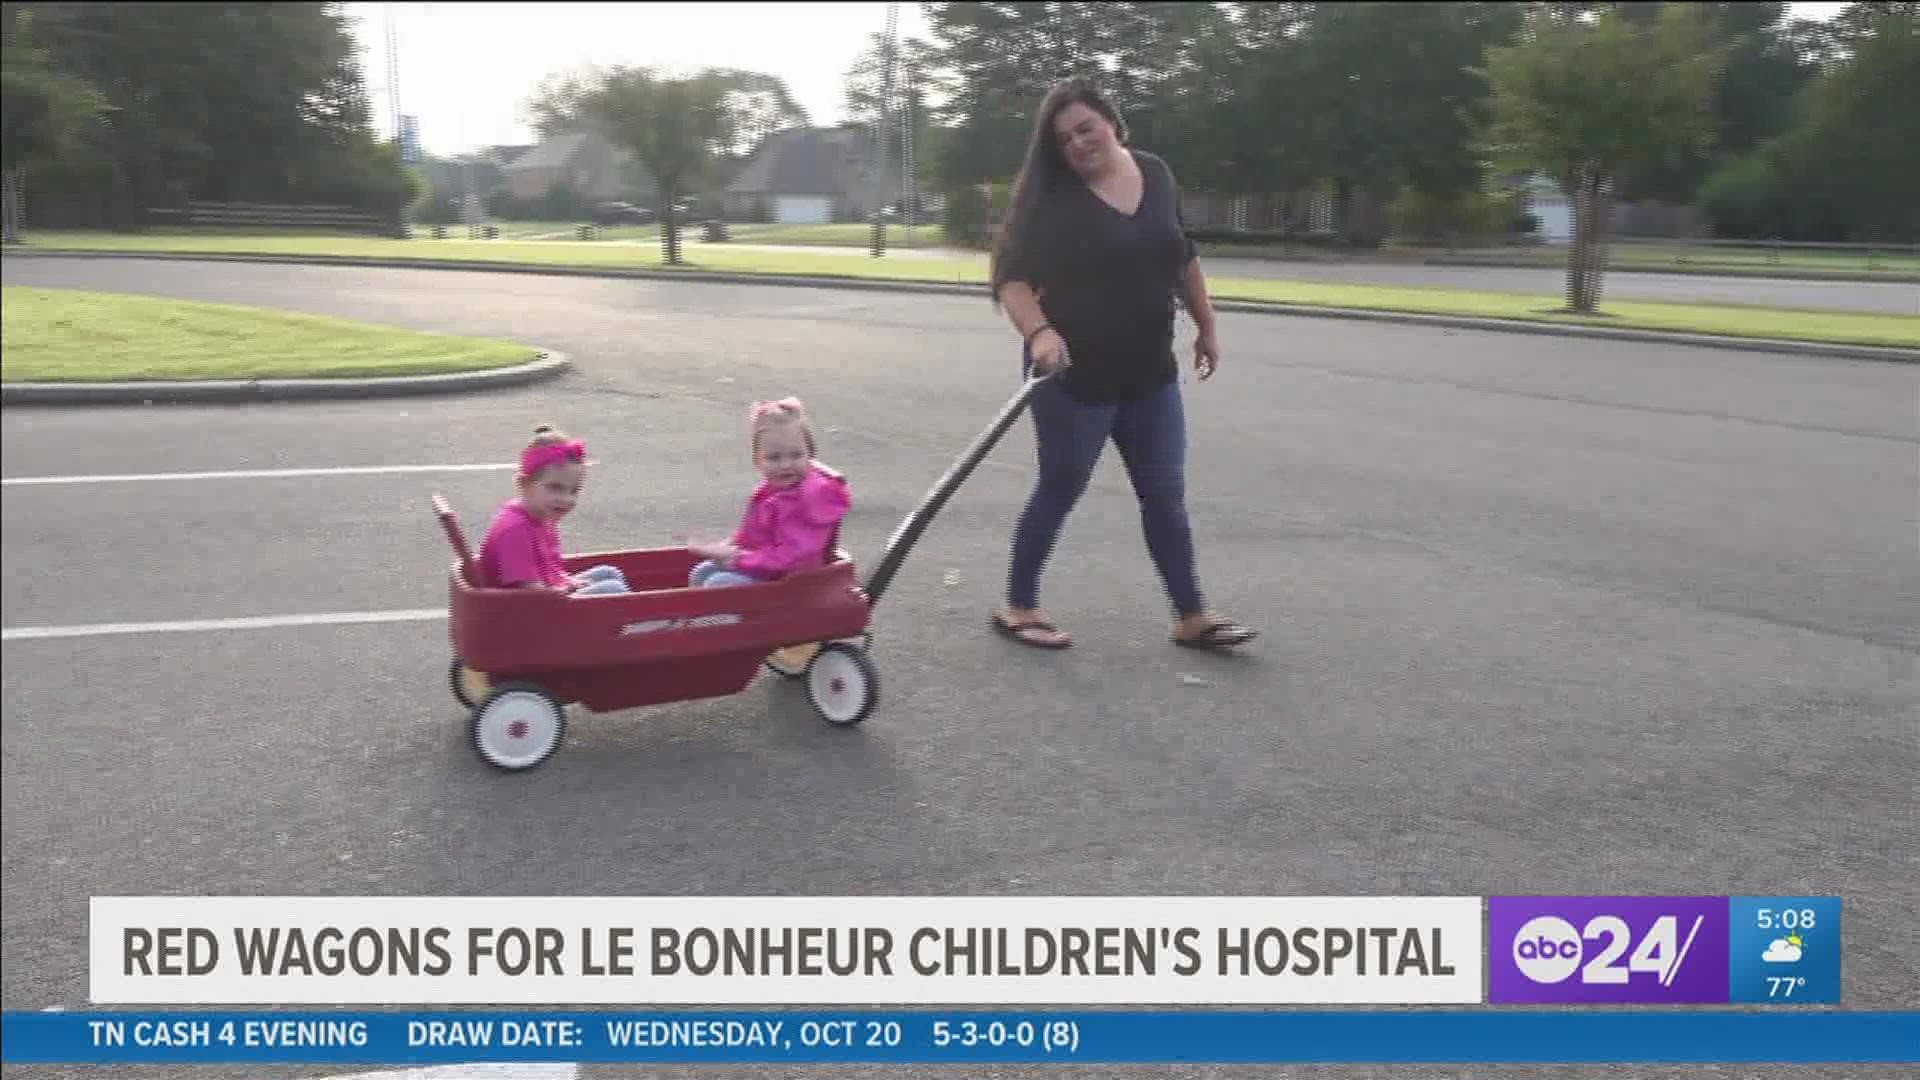 A Mid-South man started a fundraiser to get more red wagons for Le Bonheur Children’s Hospital.